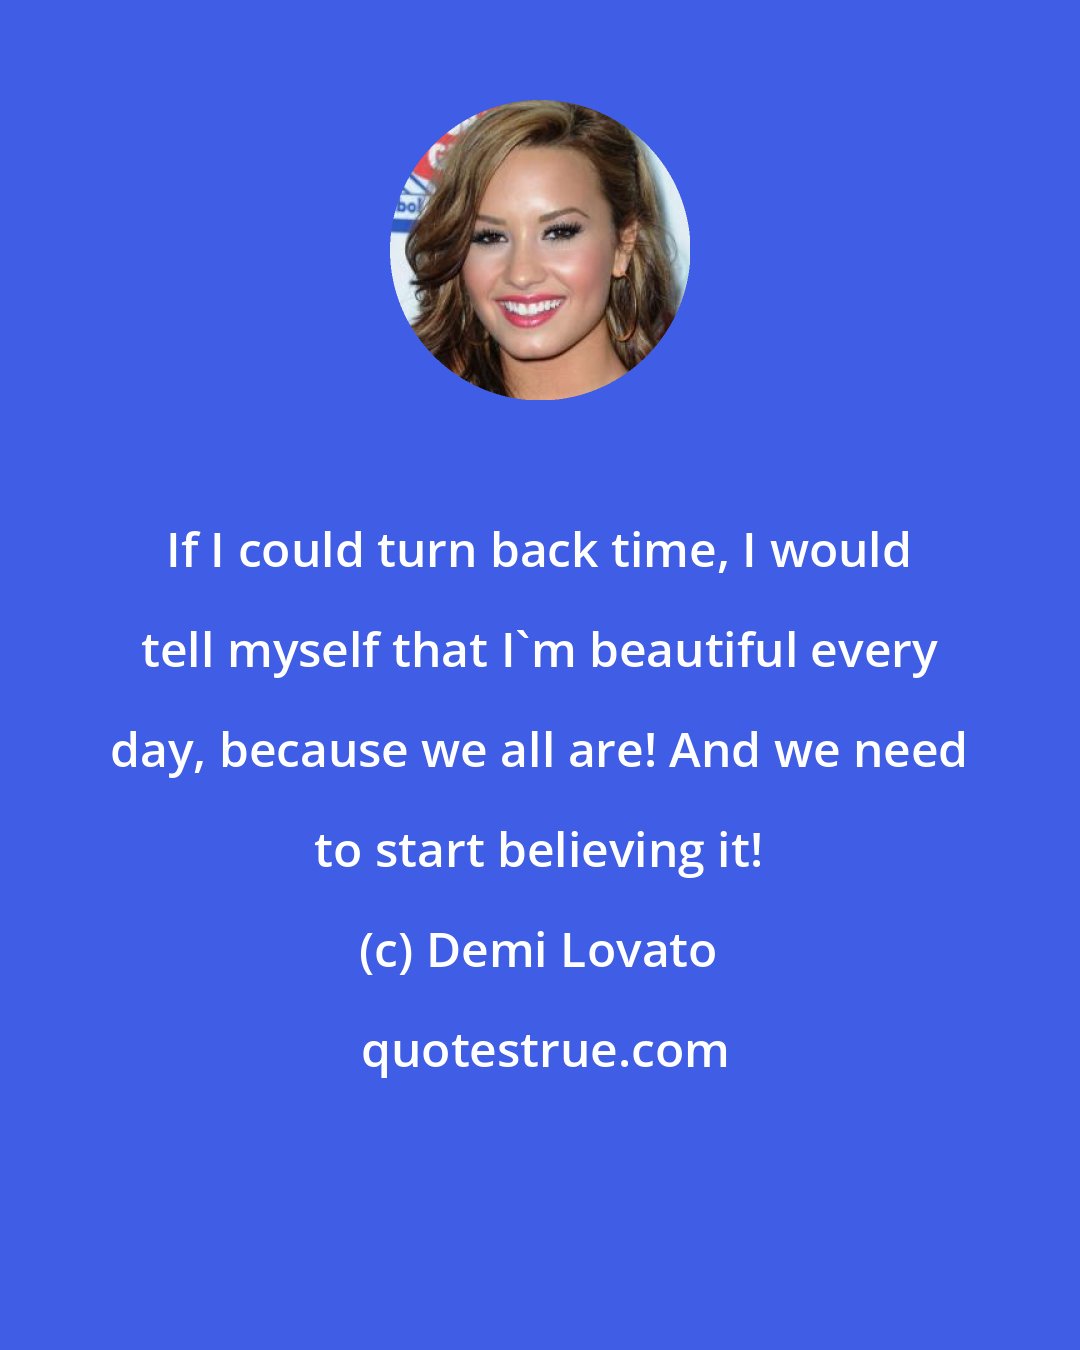 Demi Lovato: If I could turn back time, I would tell myself that I'm beautiful every day, because we all are! And we need to start believing it!